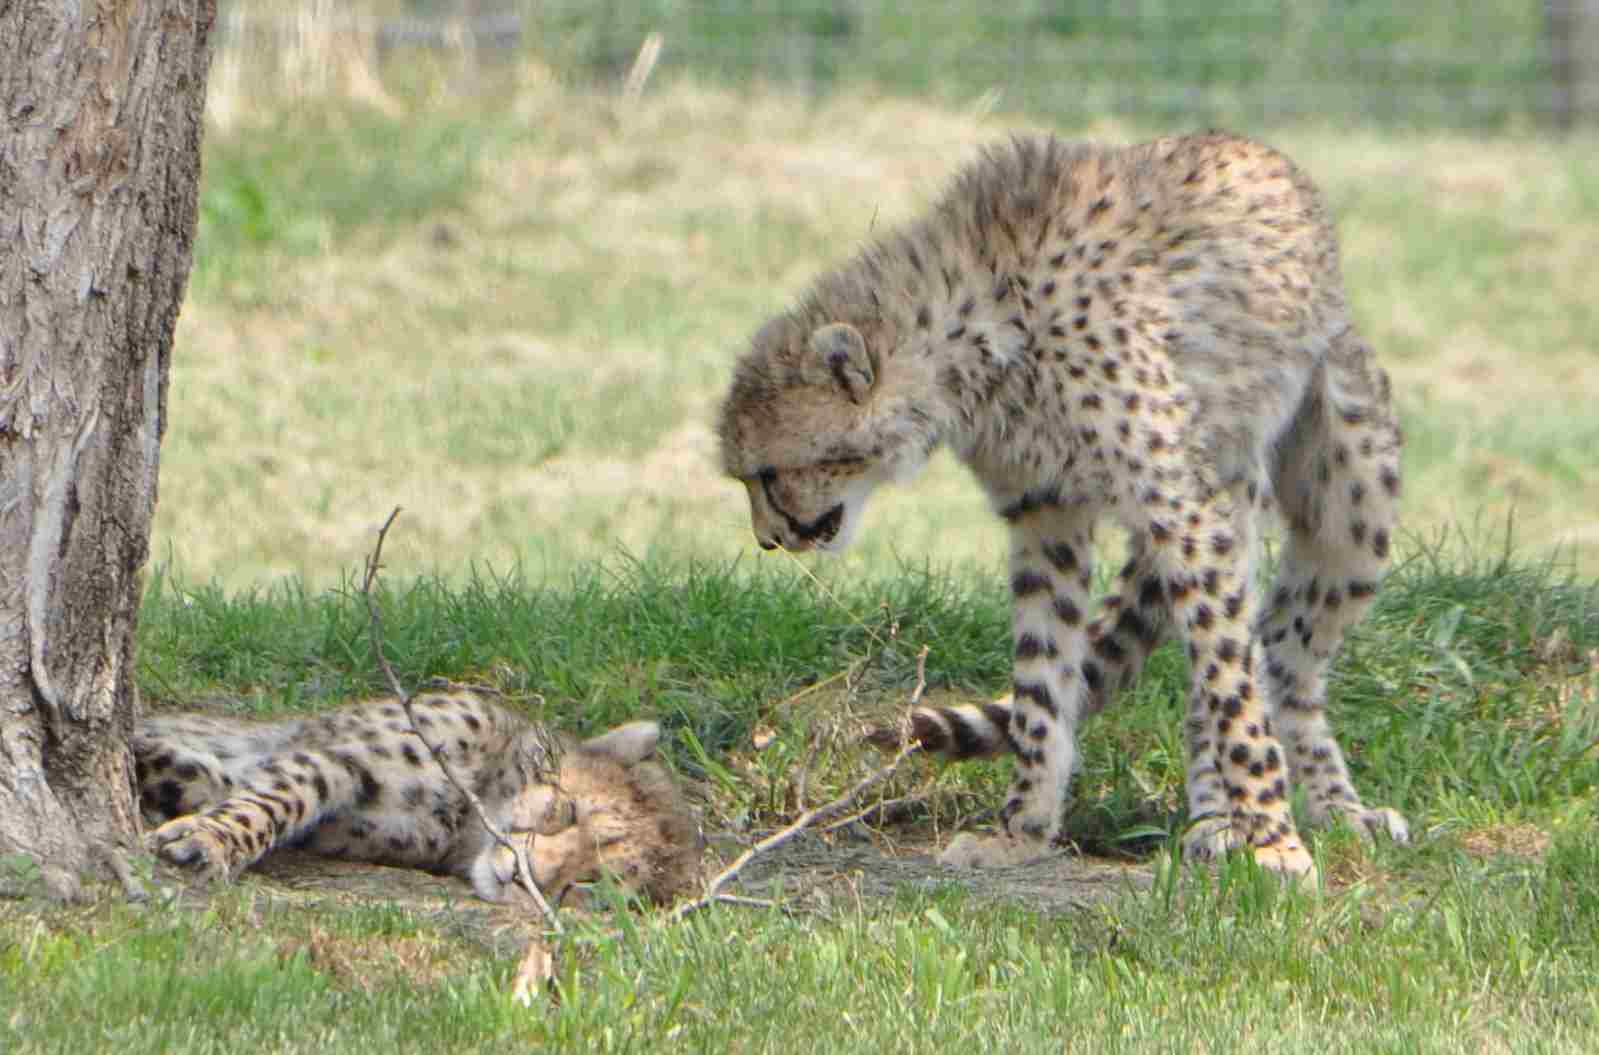 Asiatic Cheetah Vs African Cheetah: Asiatic Cheetahs are Taxonomically Different from African Cheetahs (Credit: Ted 2011 .CC BY-SA 2.0.)